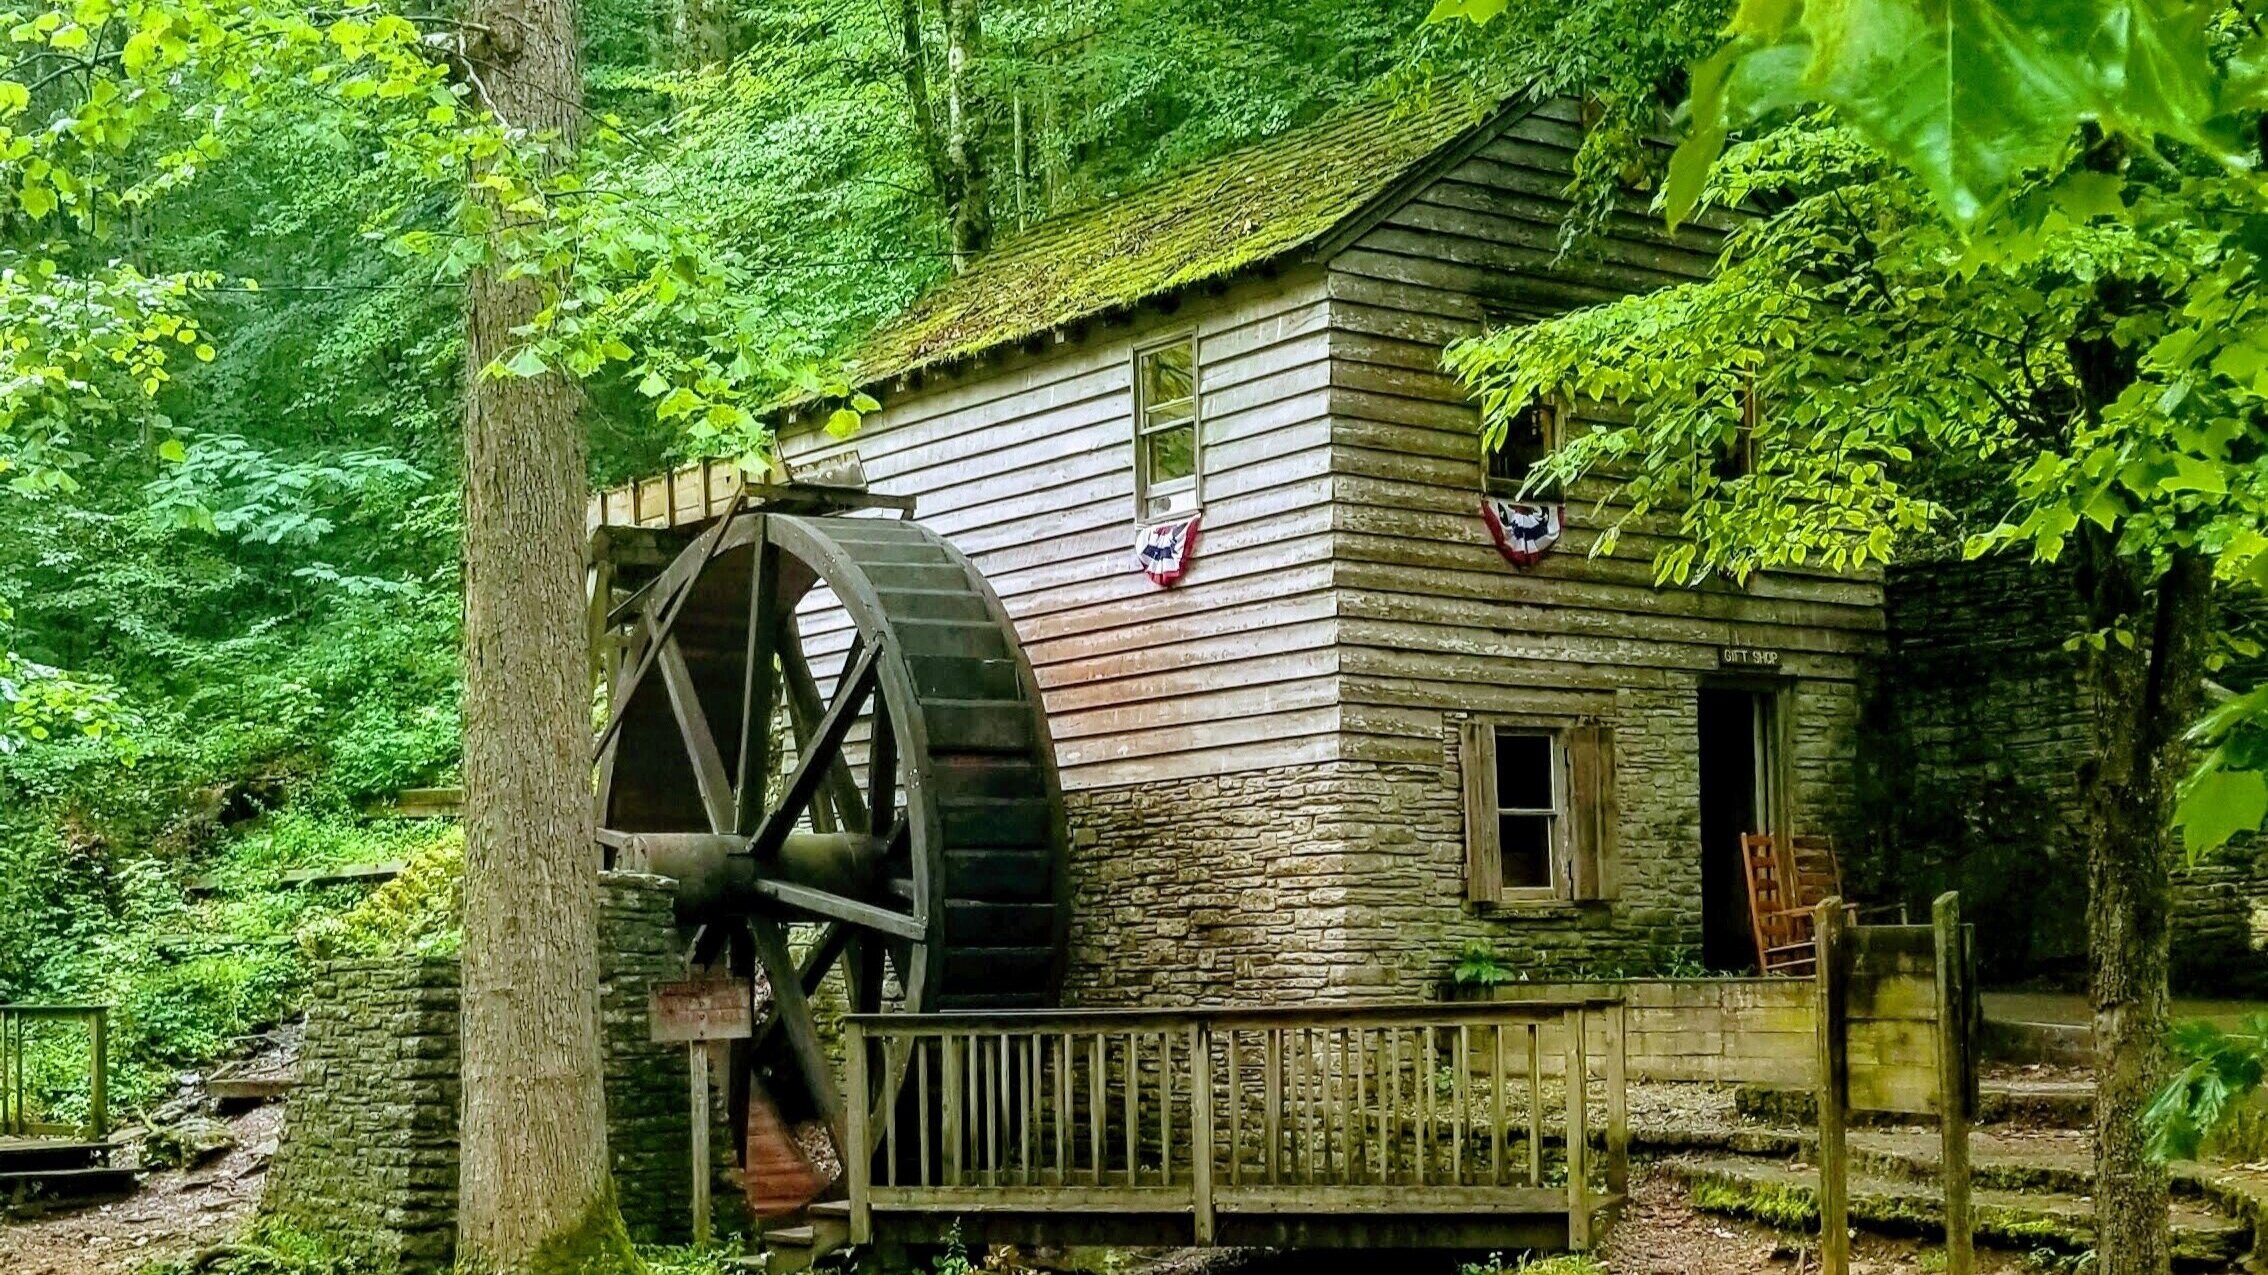 Grist Mill Norris Dam State Park